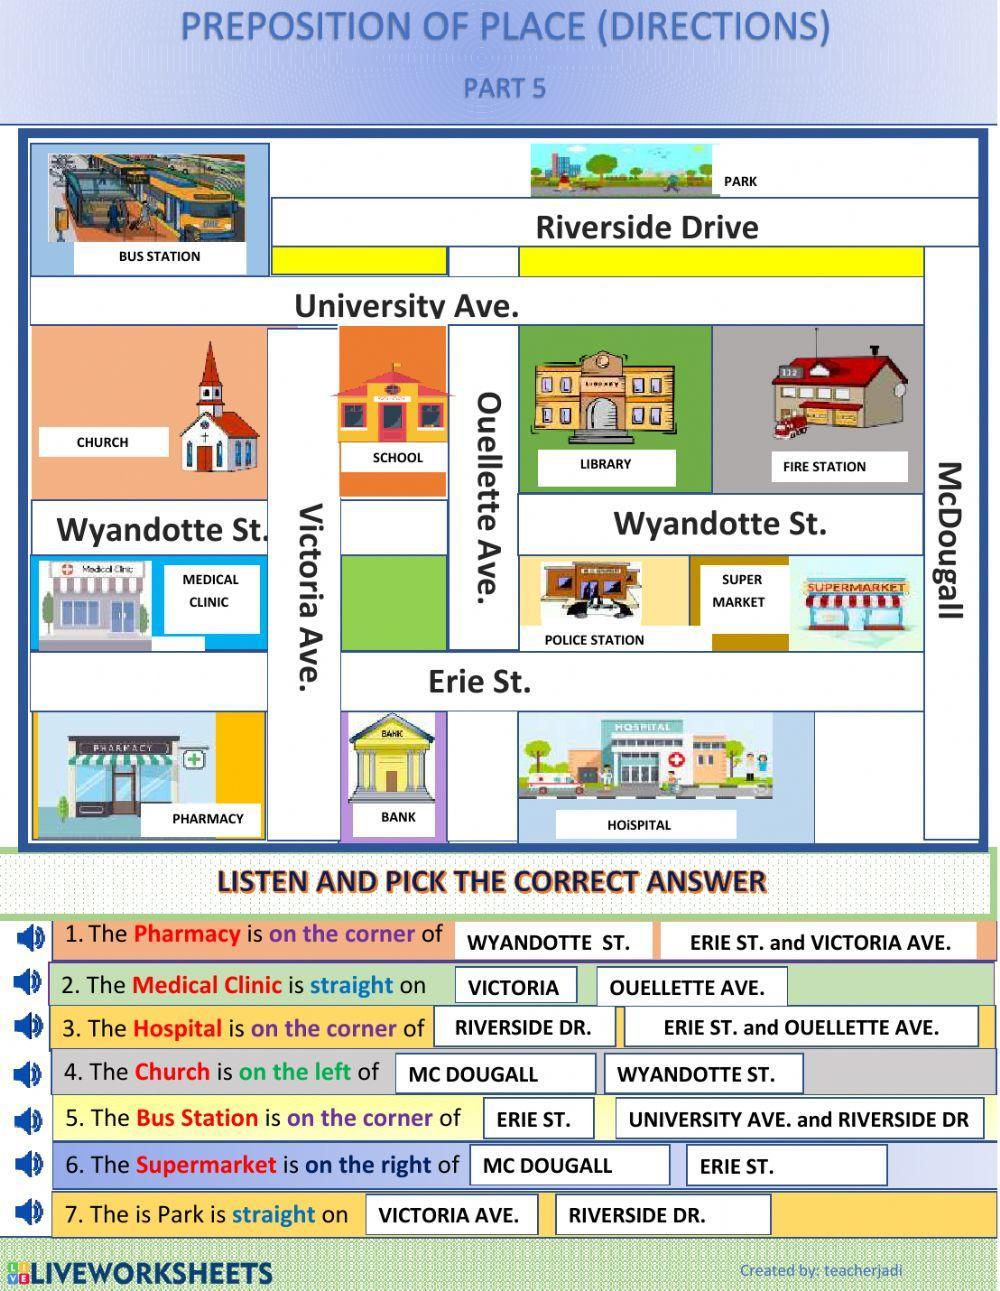 Prepositions of Place part 5-Directions